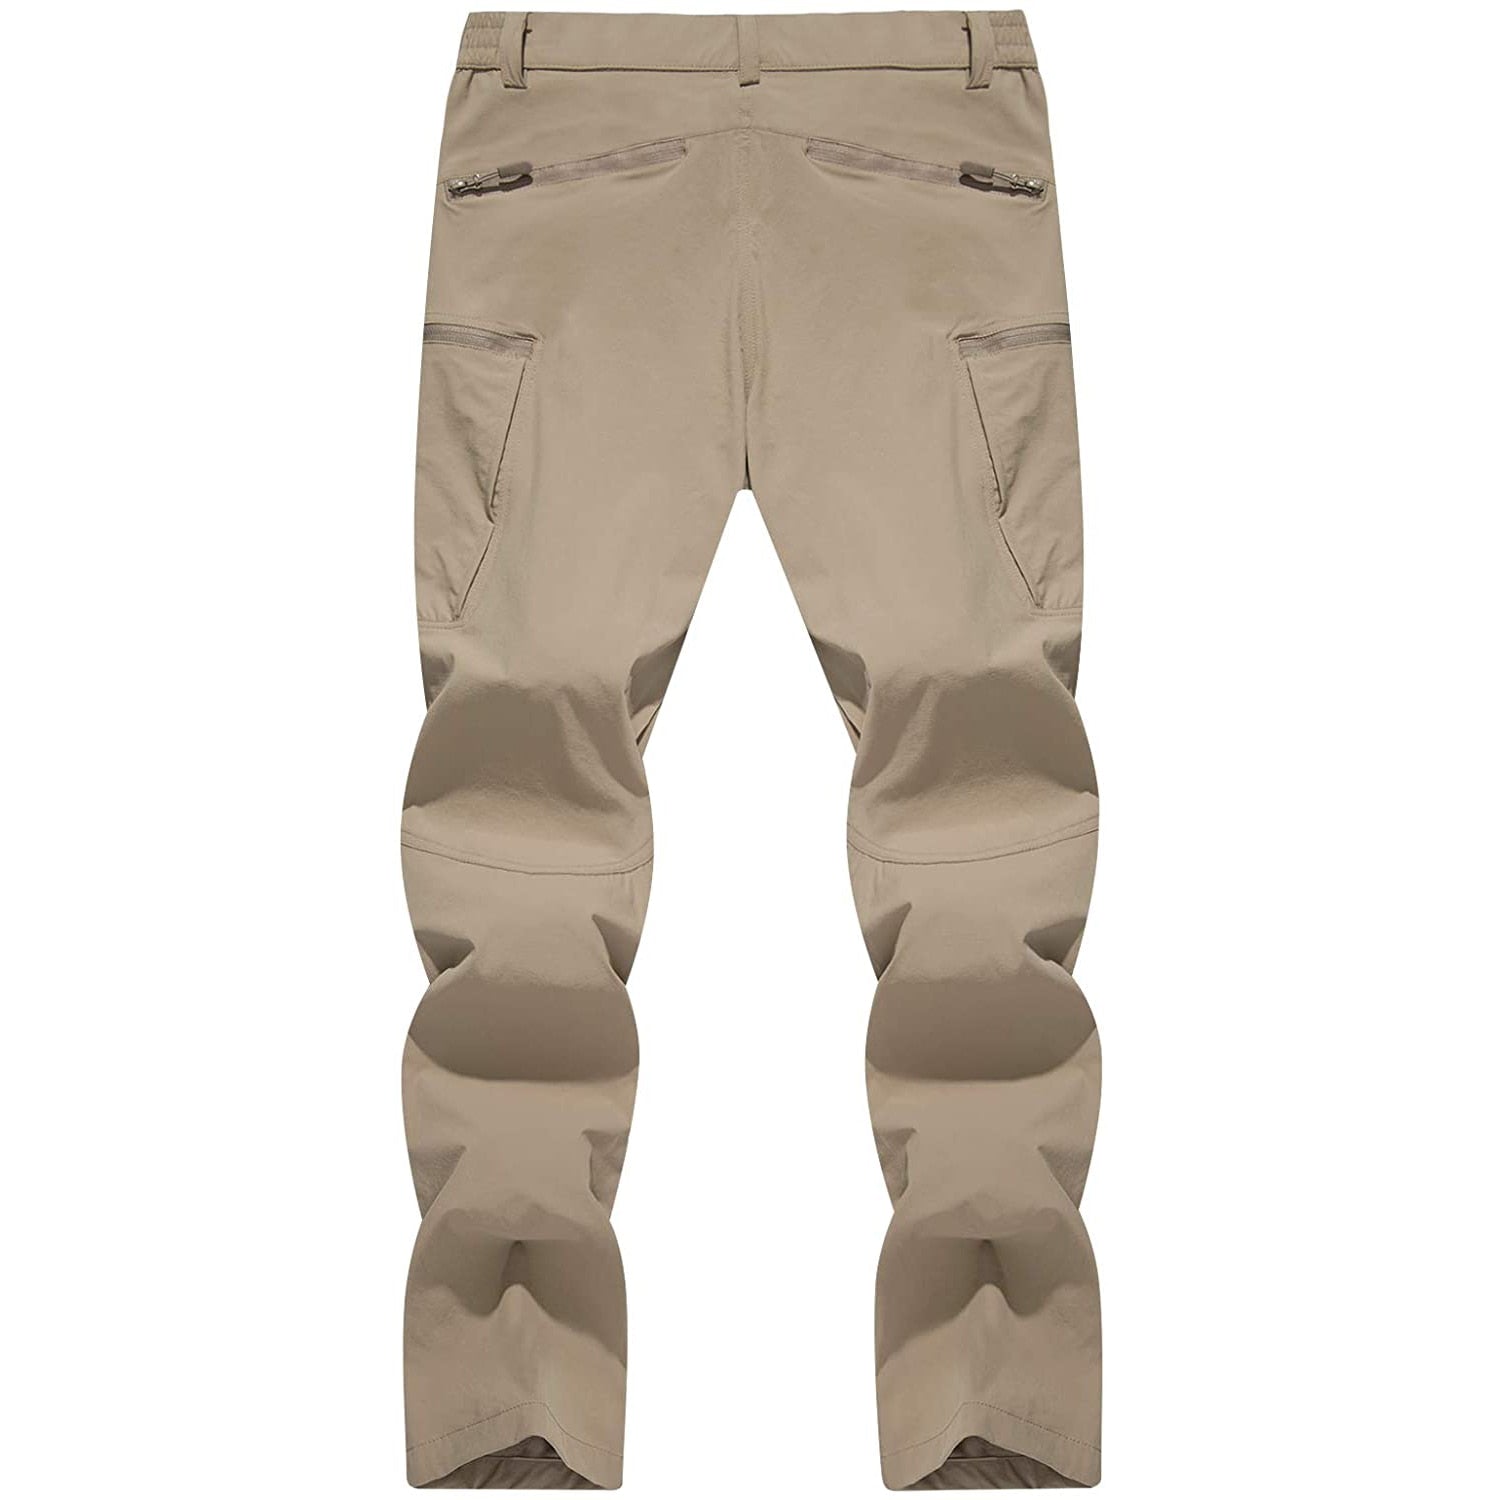 Khaki Zip Pockets Cargo Pants by Andersson Bell on Sale